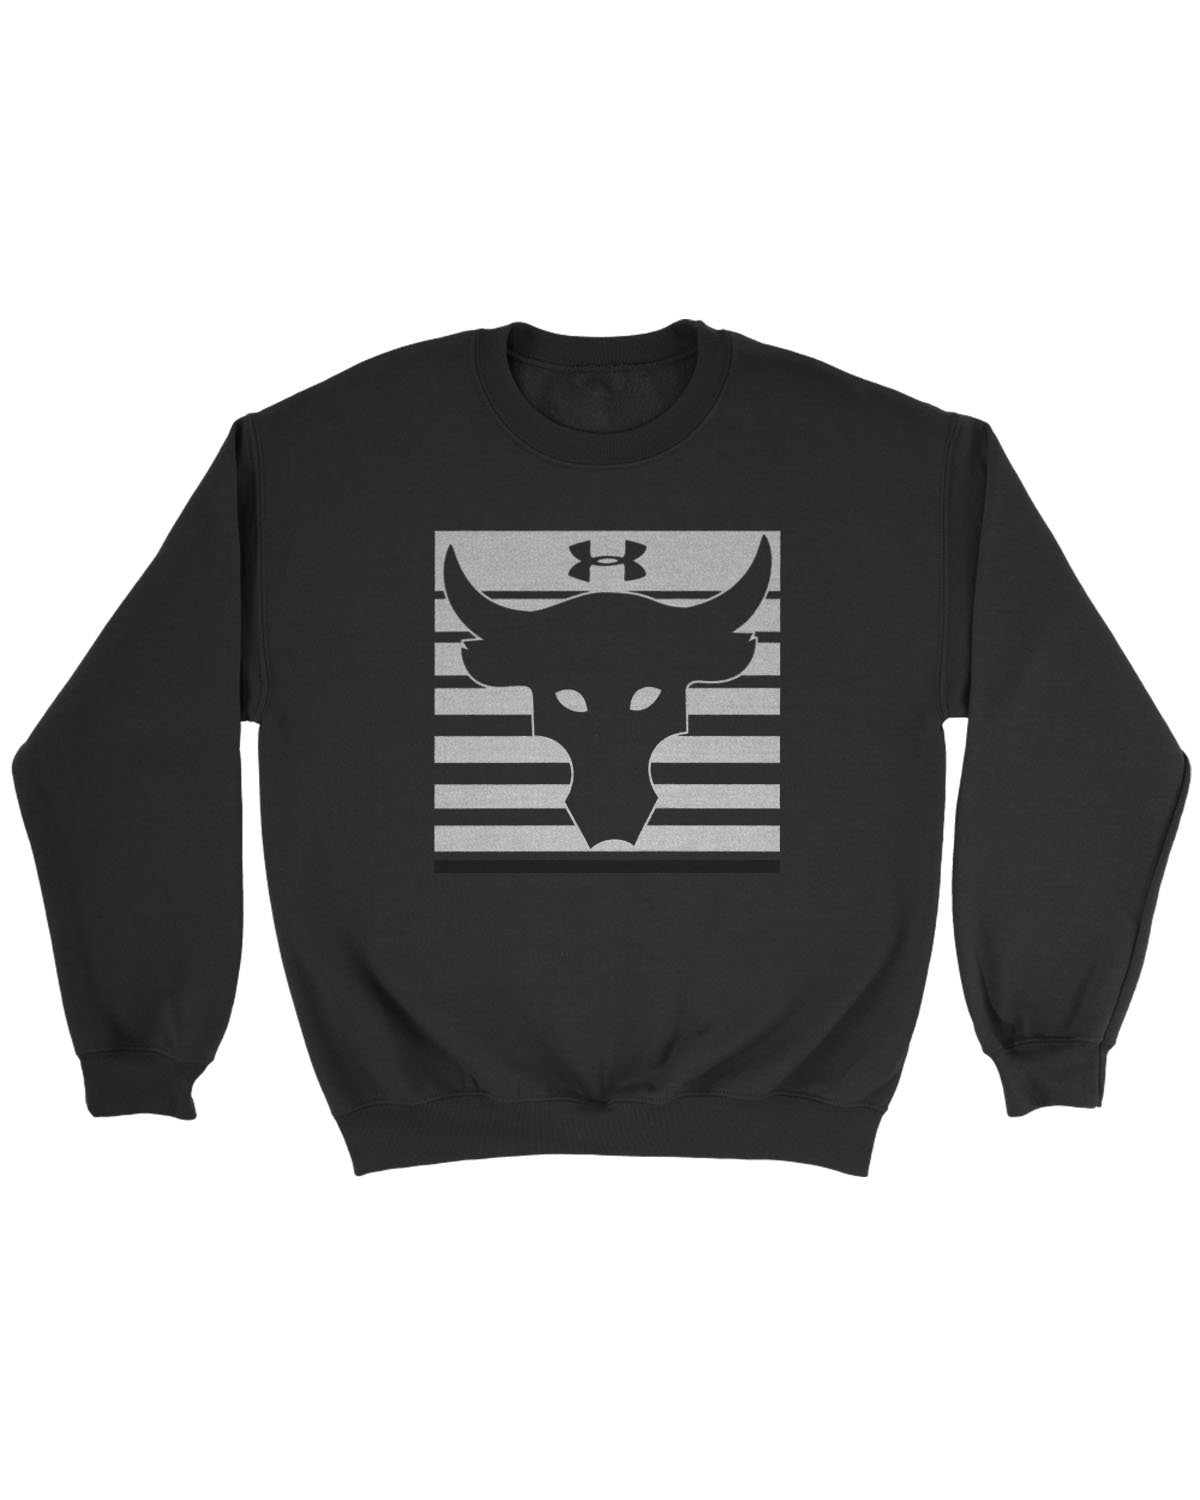 Under Armour X Project The Rock Sweatshirt